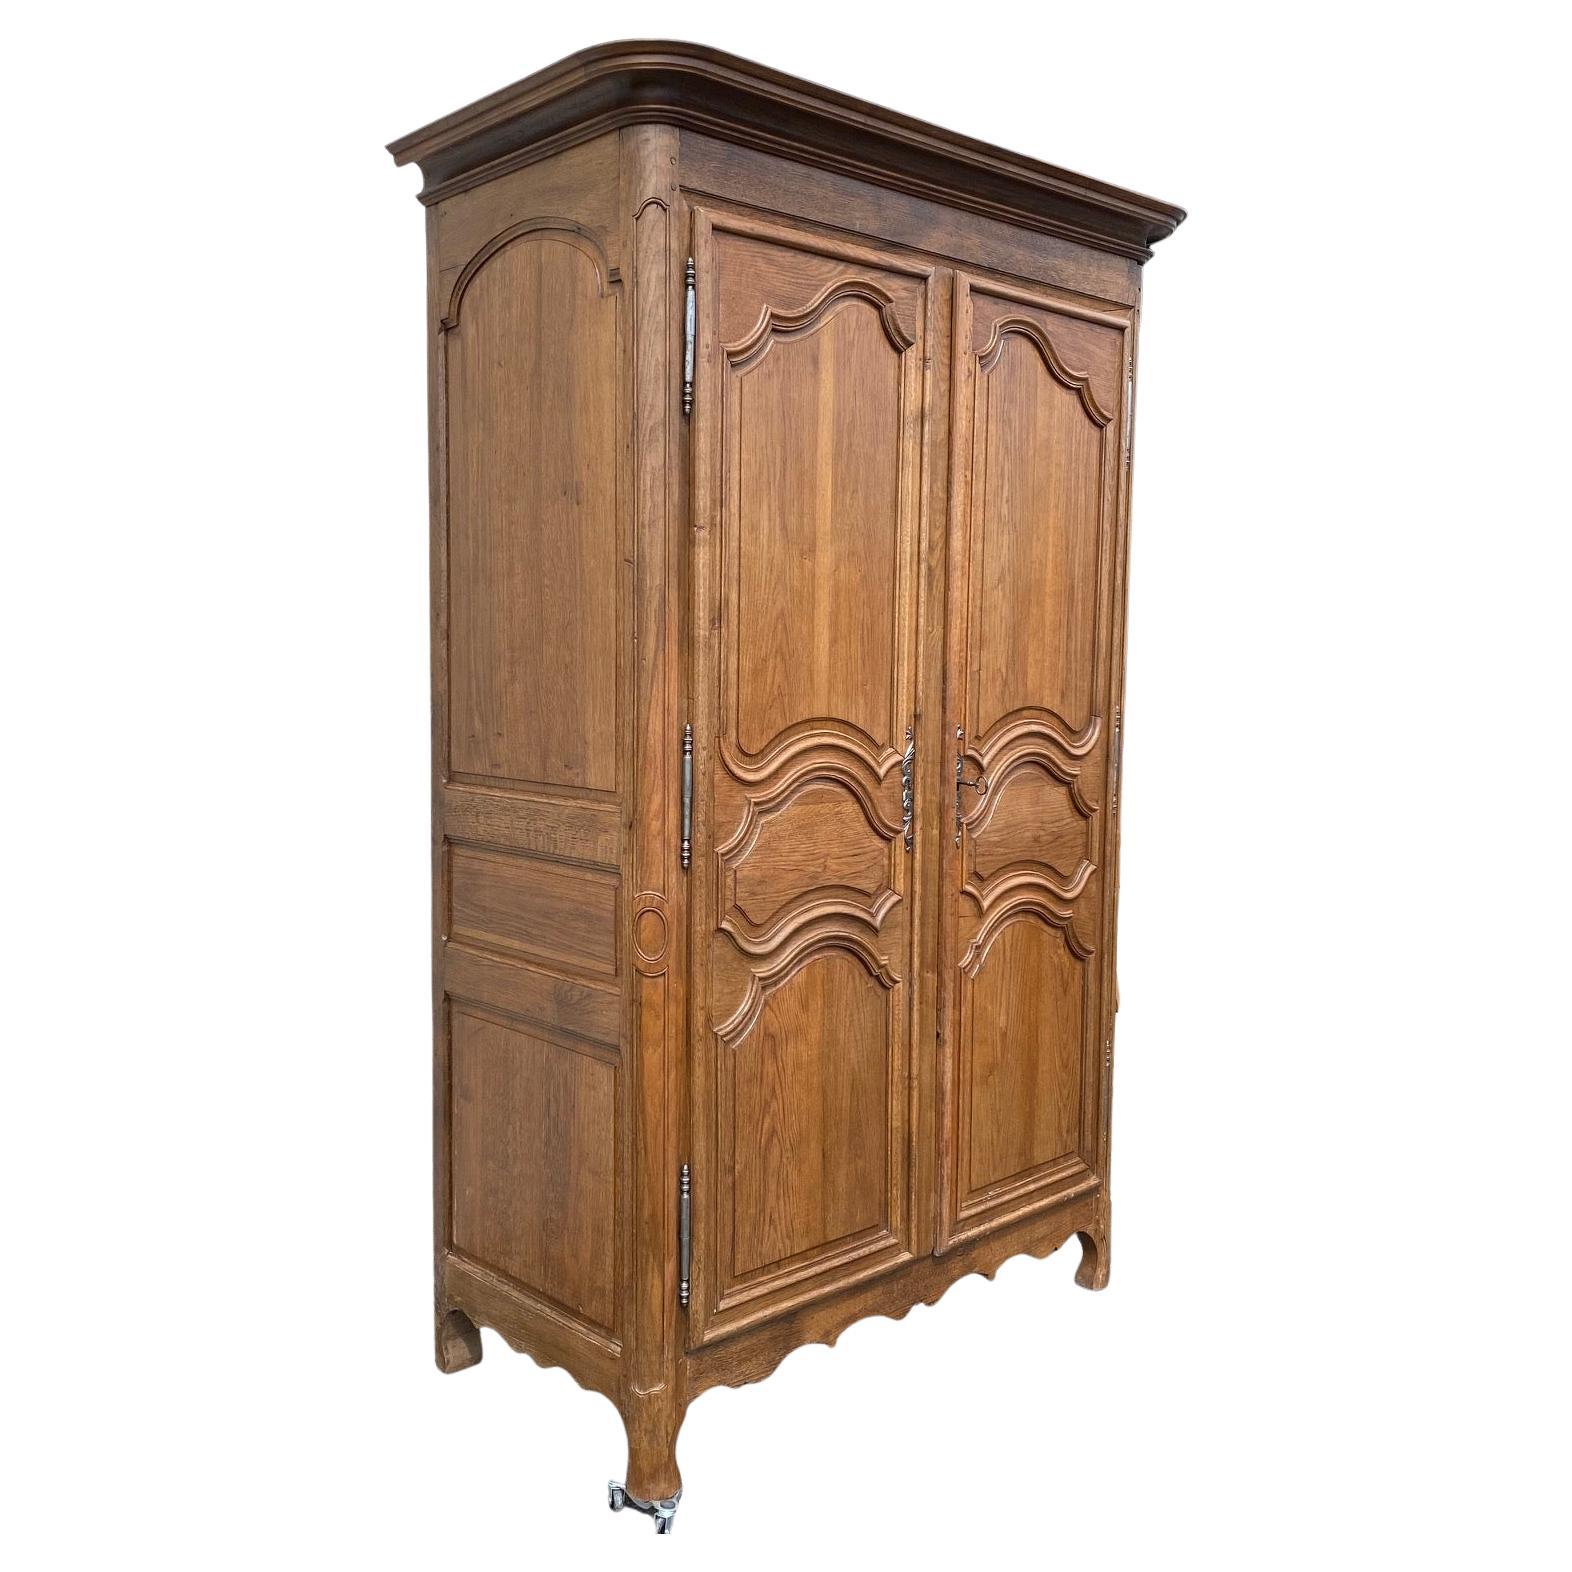 A very good quality carved walnut armoire originating from Normandy, France which was made during the early 19th century. The case consists of a carved frieze and paneled doors above a shaped apron.  Stunning brass escutcheon hardware with original